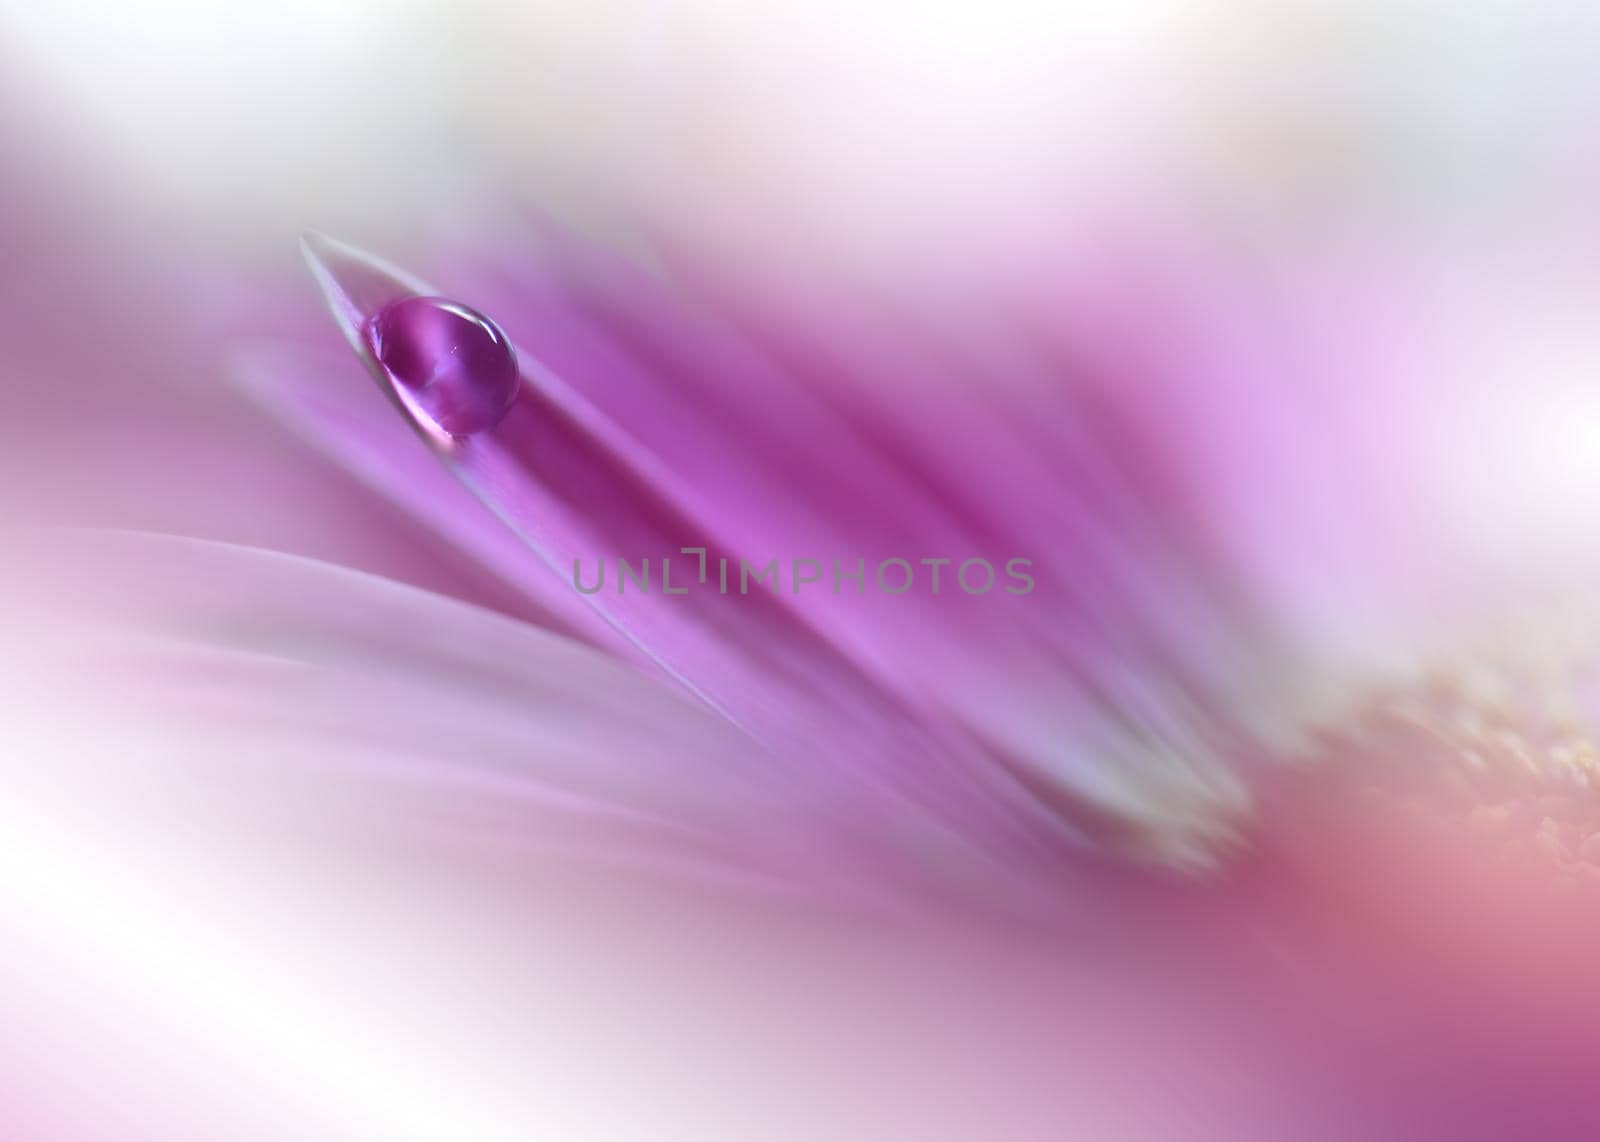 Beautiful Macro Shot of Magic Flowers.Border Art Design.Magic Light.Extreme Close up Photography.Conceptual Abstract Image.Violet and Pink Background.Fantasy Art.Creative Wallpaper.Beautiful Nature Background.Amazing Spring Flower.Water Drop.Copy Space.